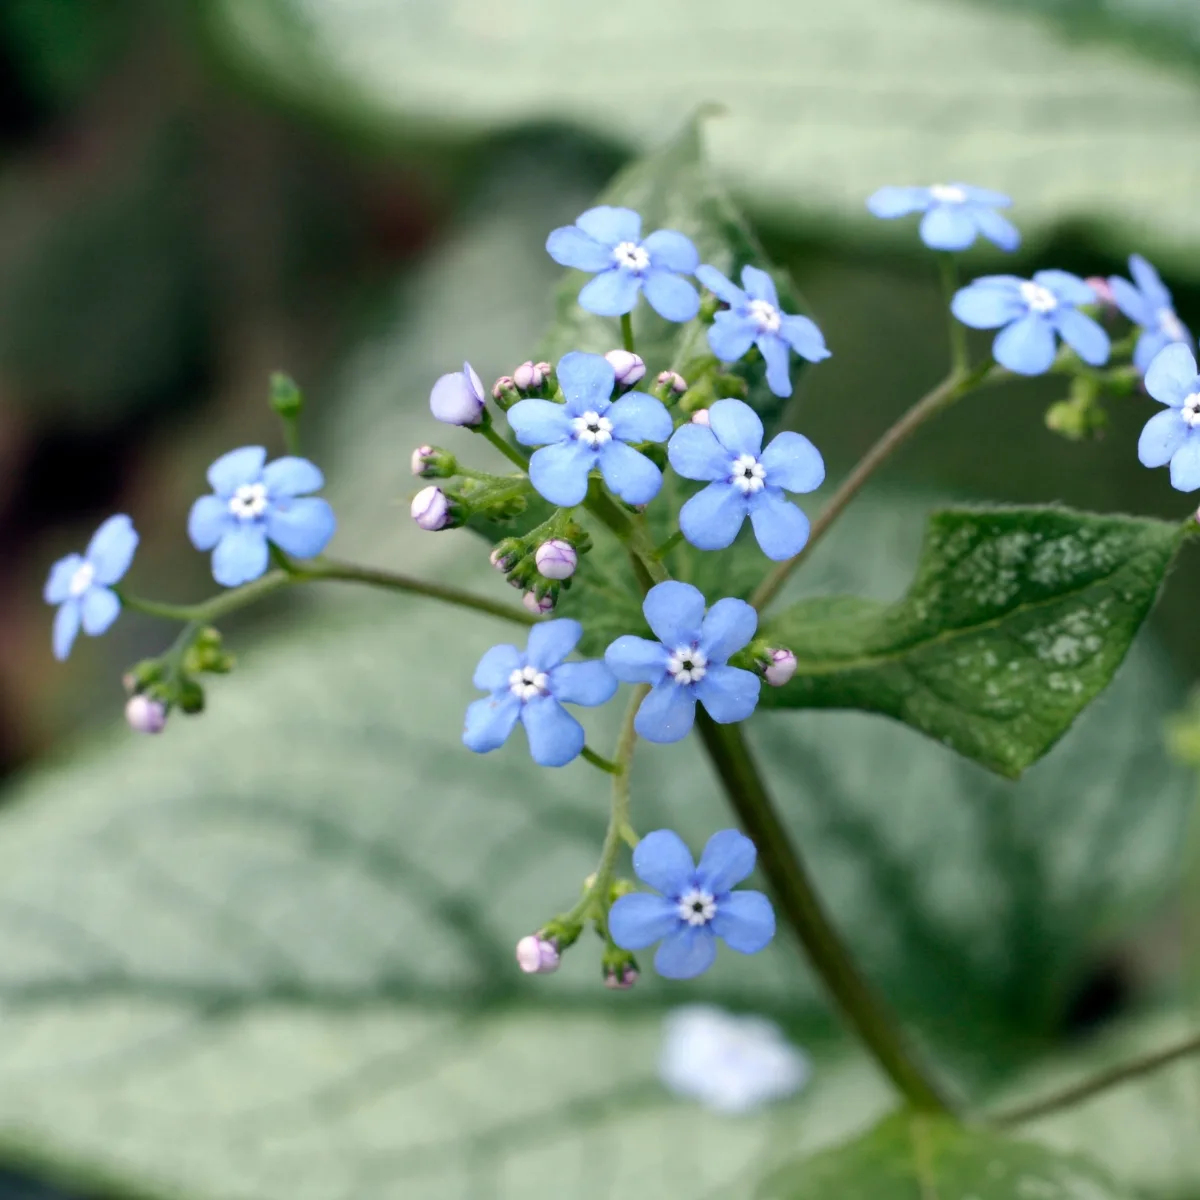 brunnera flowers and leaves